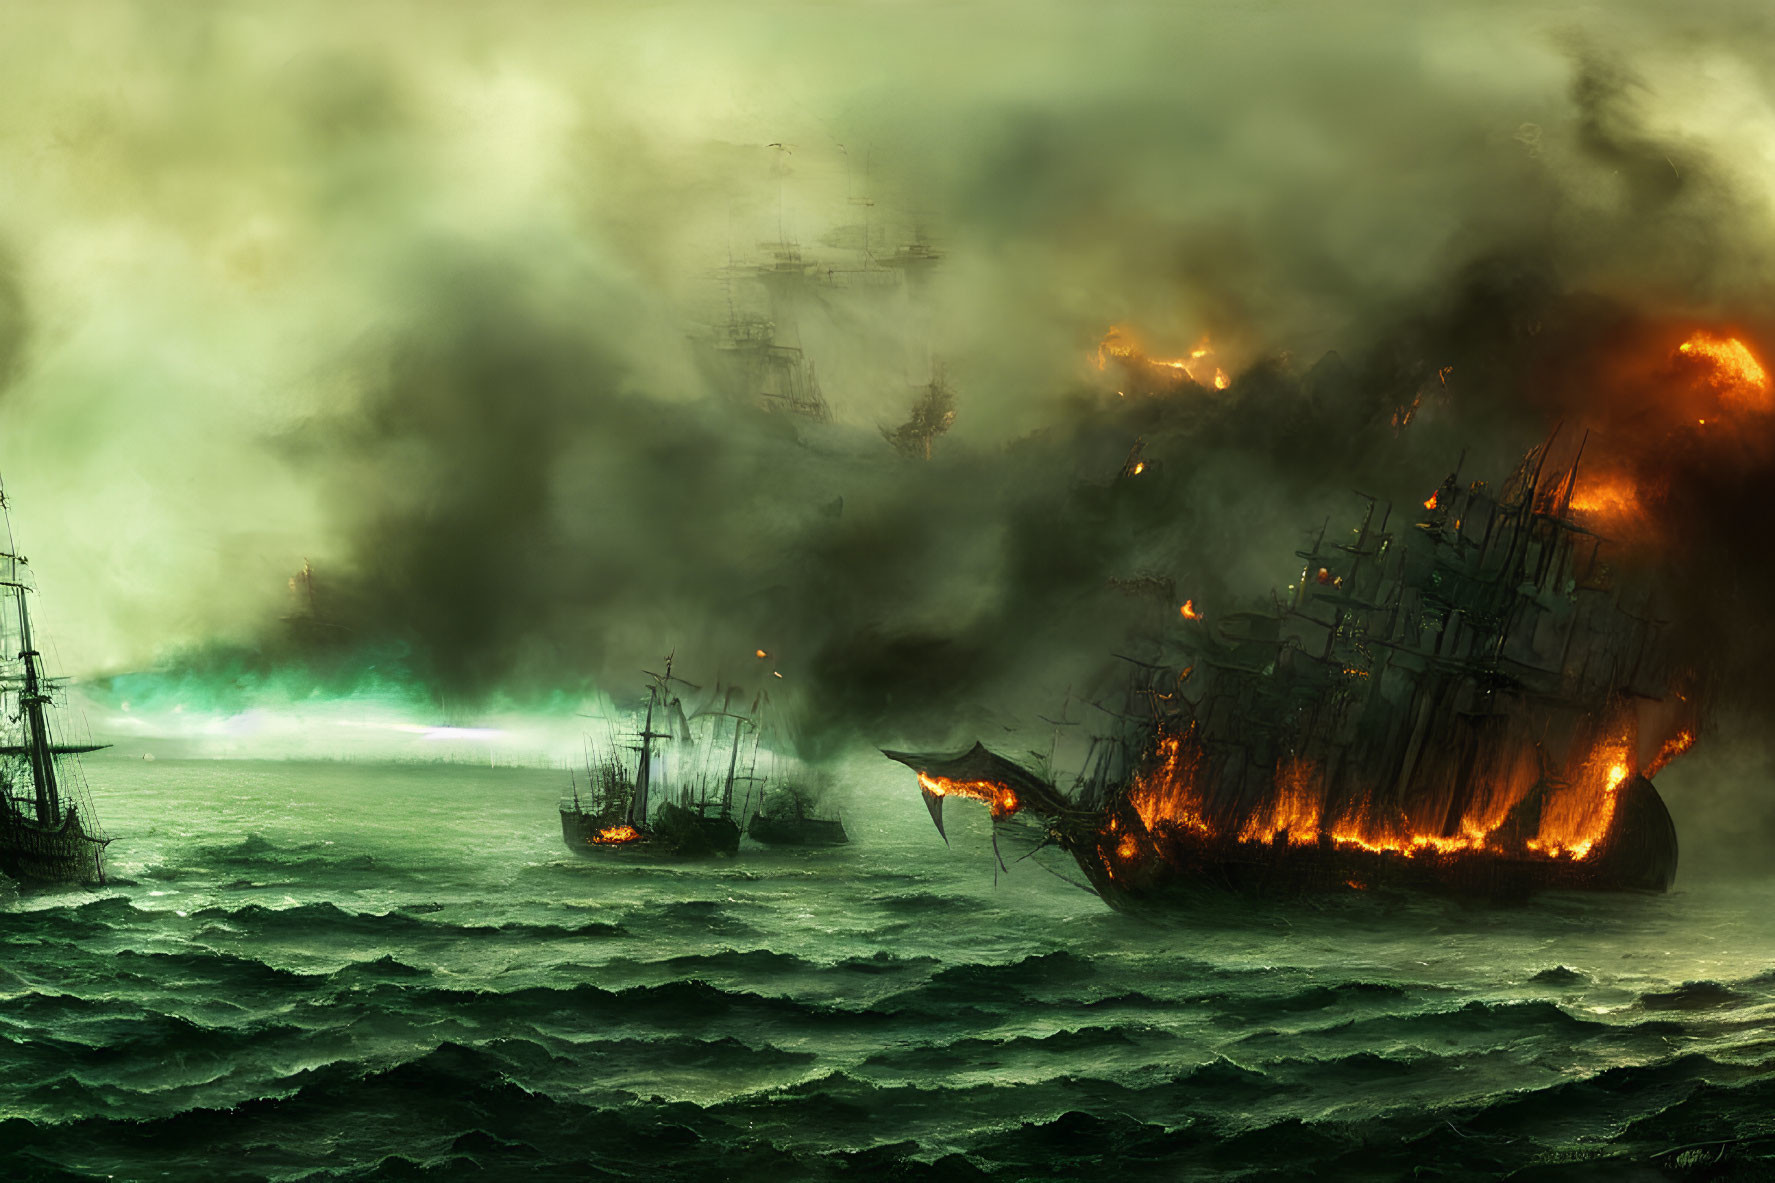 Historic naval battle scene with ships in turmoil and eerie green light